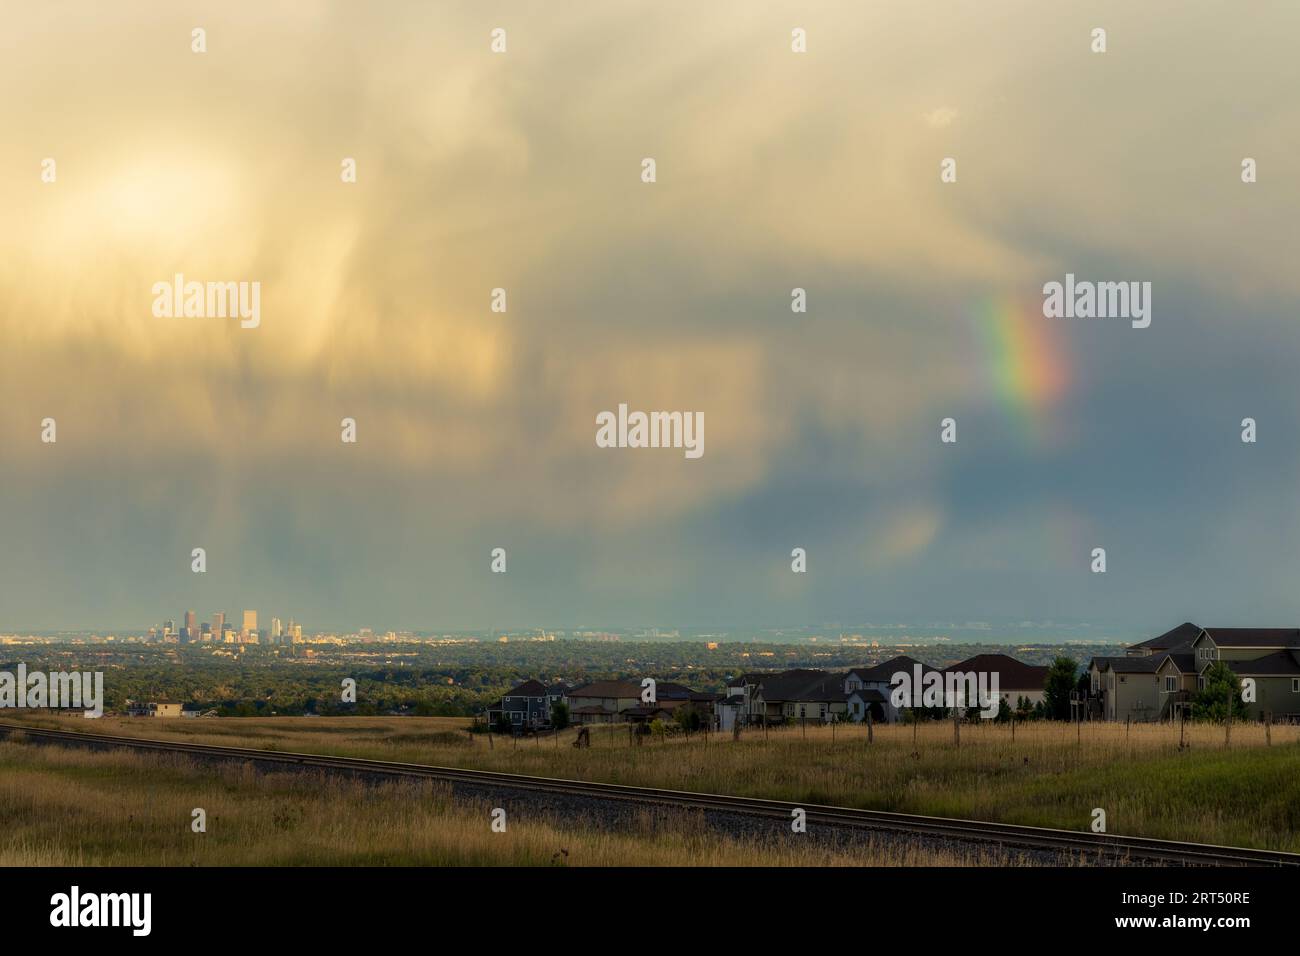 Rainbow Over Denver. Colorado Stormy Sky with Colorful Rainbow. Downtown Denver Skyline is Visible in the Distance Stock Photo